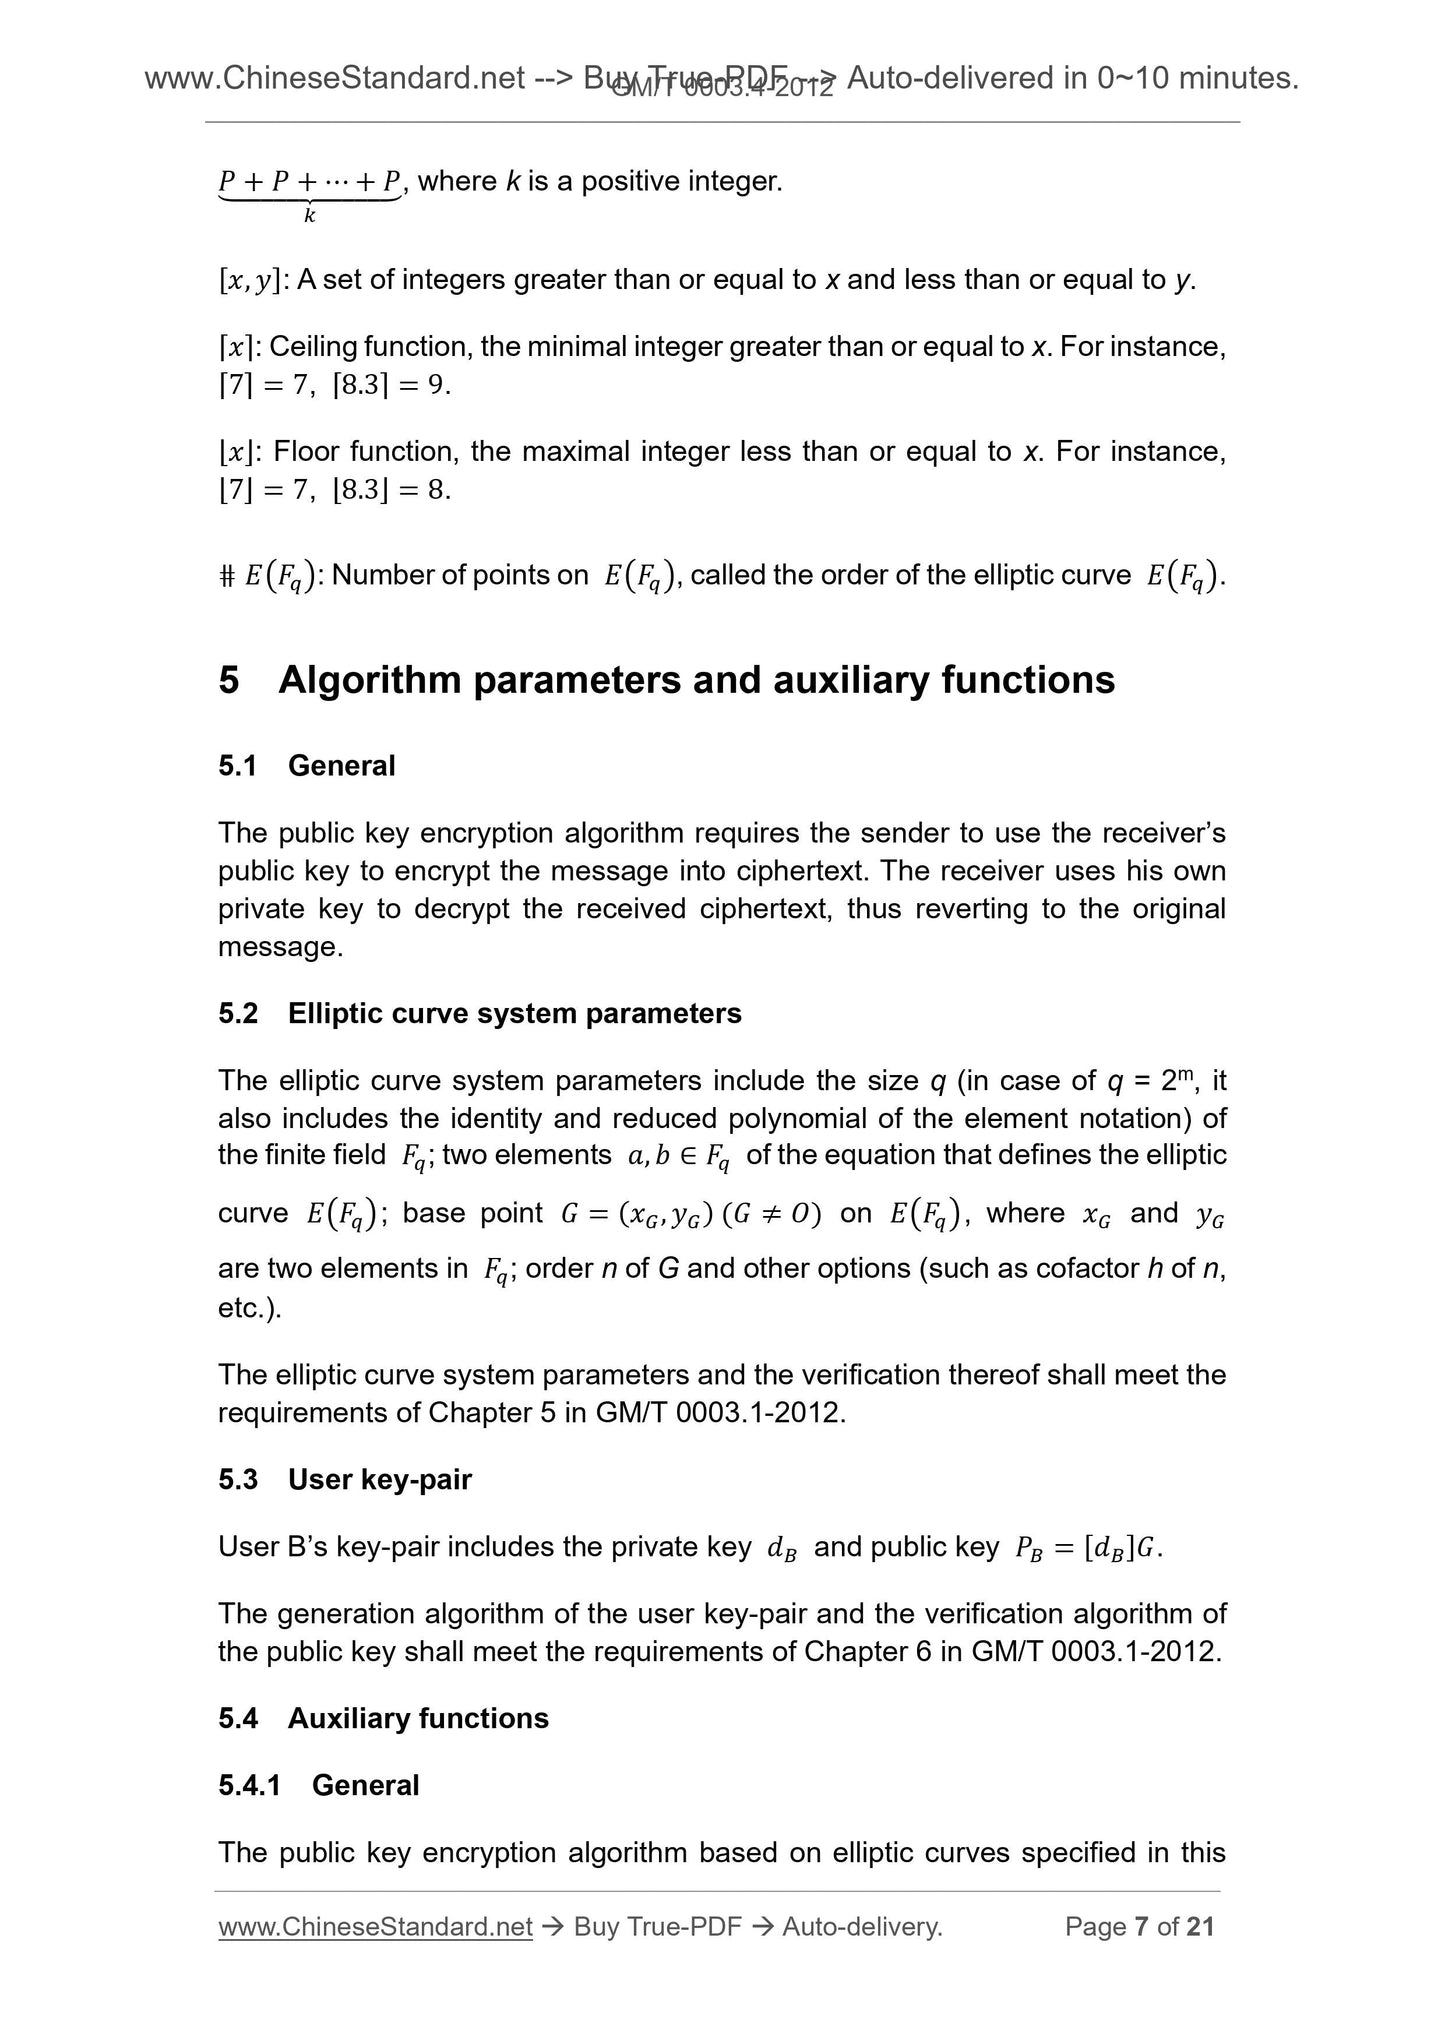 GM/T 0003.4-2012 Page 5